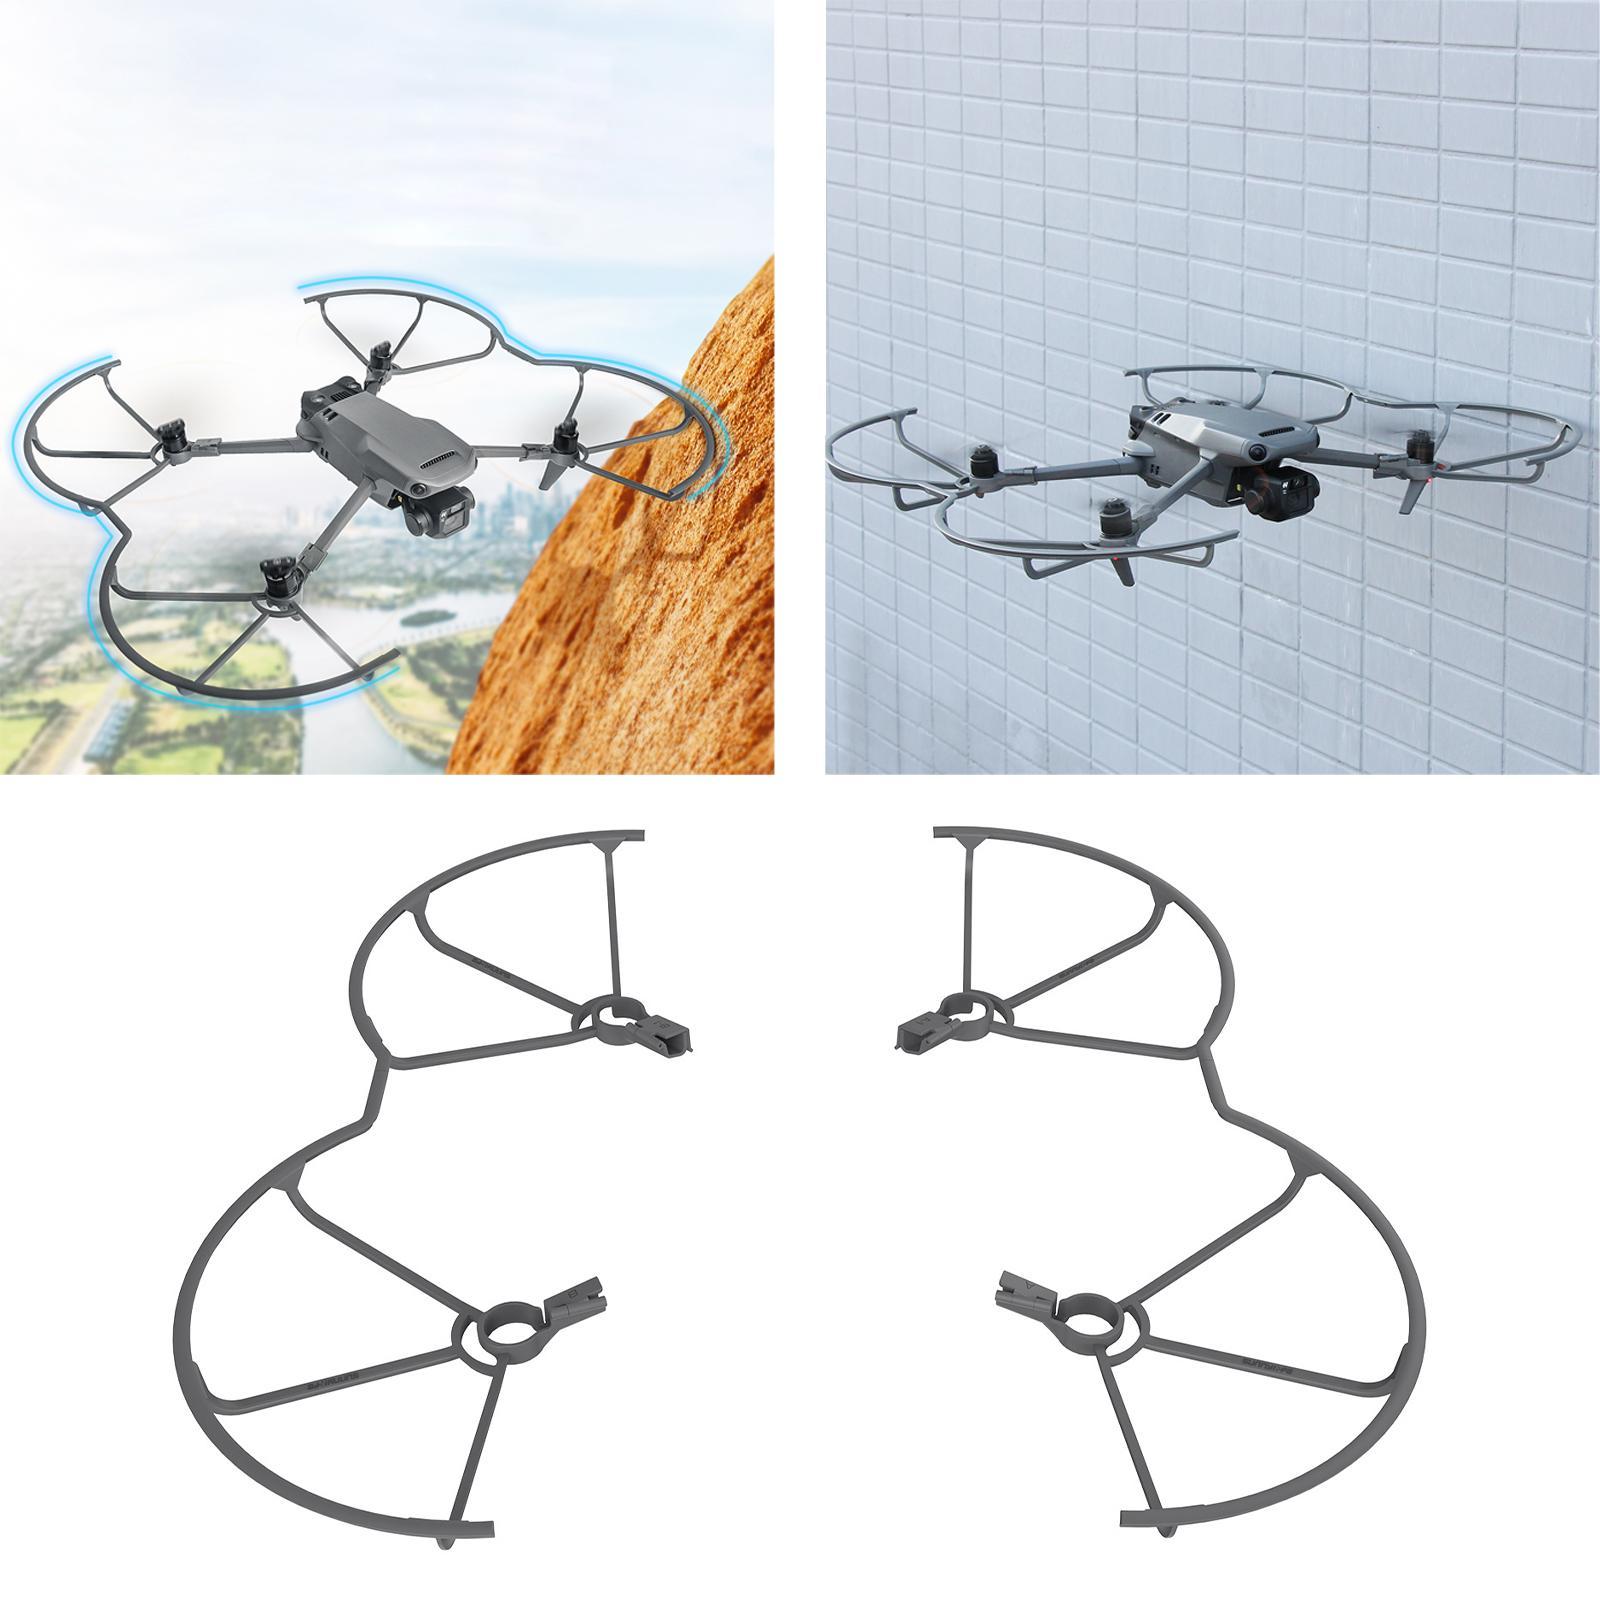 2 Pieces Propeller Protector Guard Quick Release Protective for 3